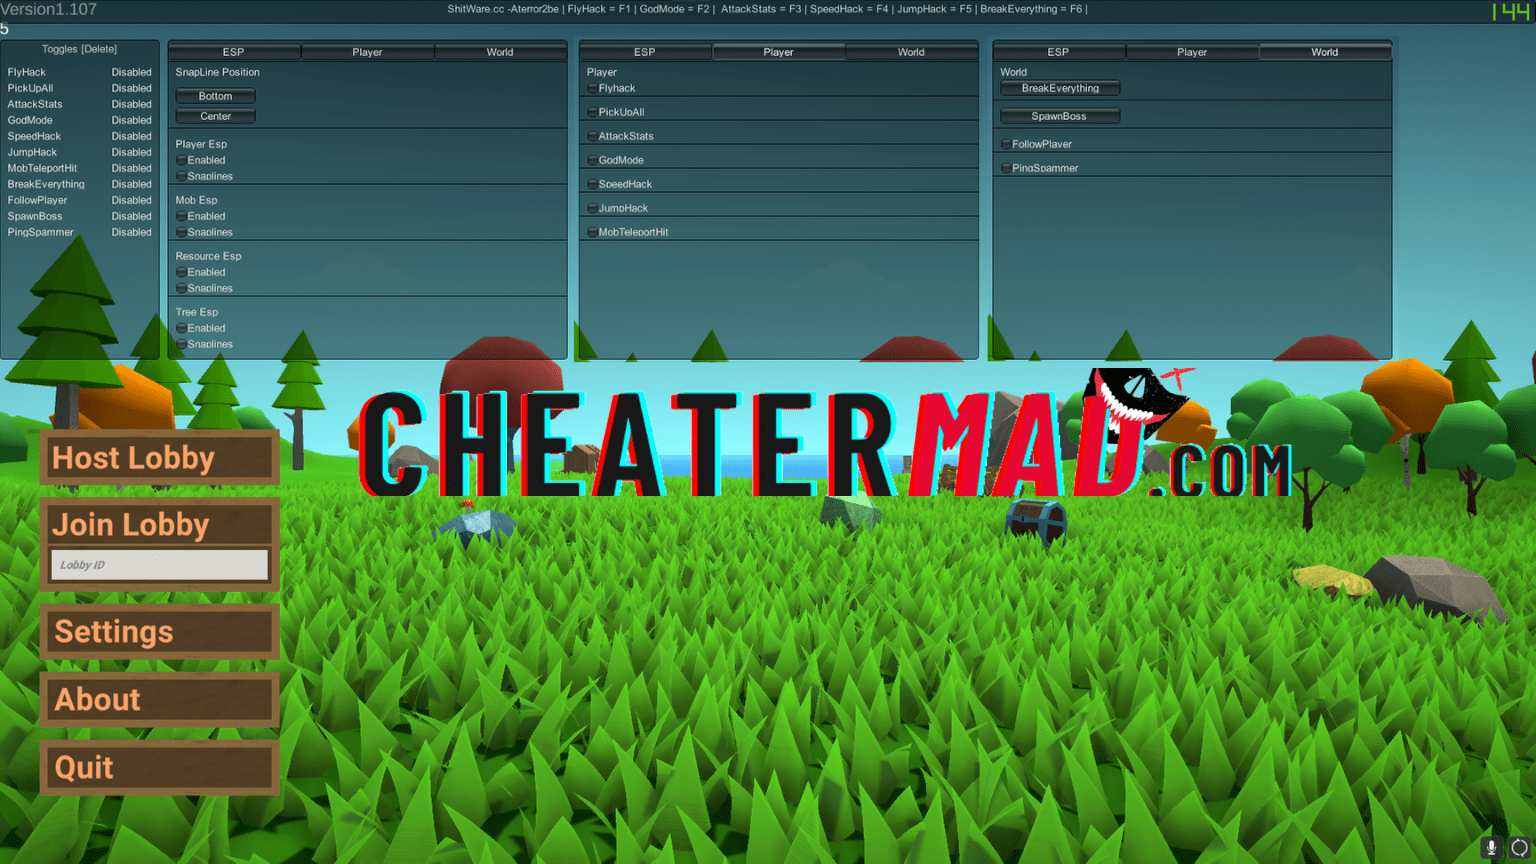 Other Games Cheatermad Com - roblox aimbot source code